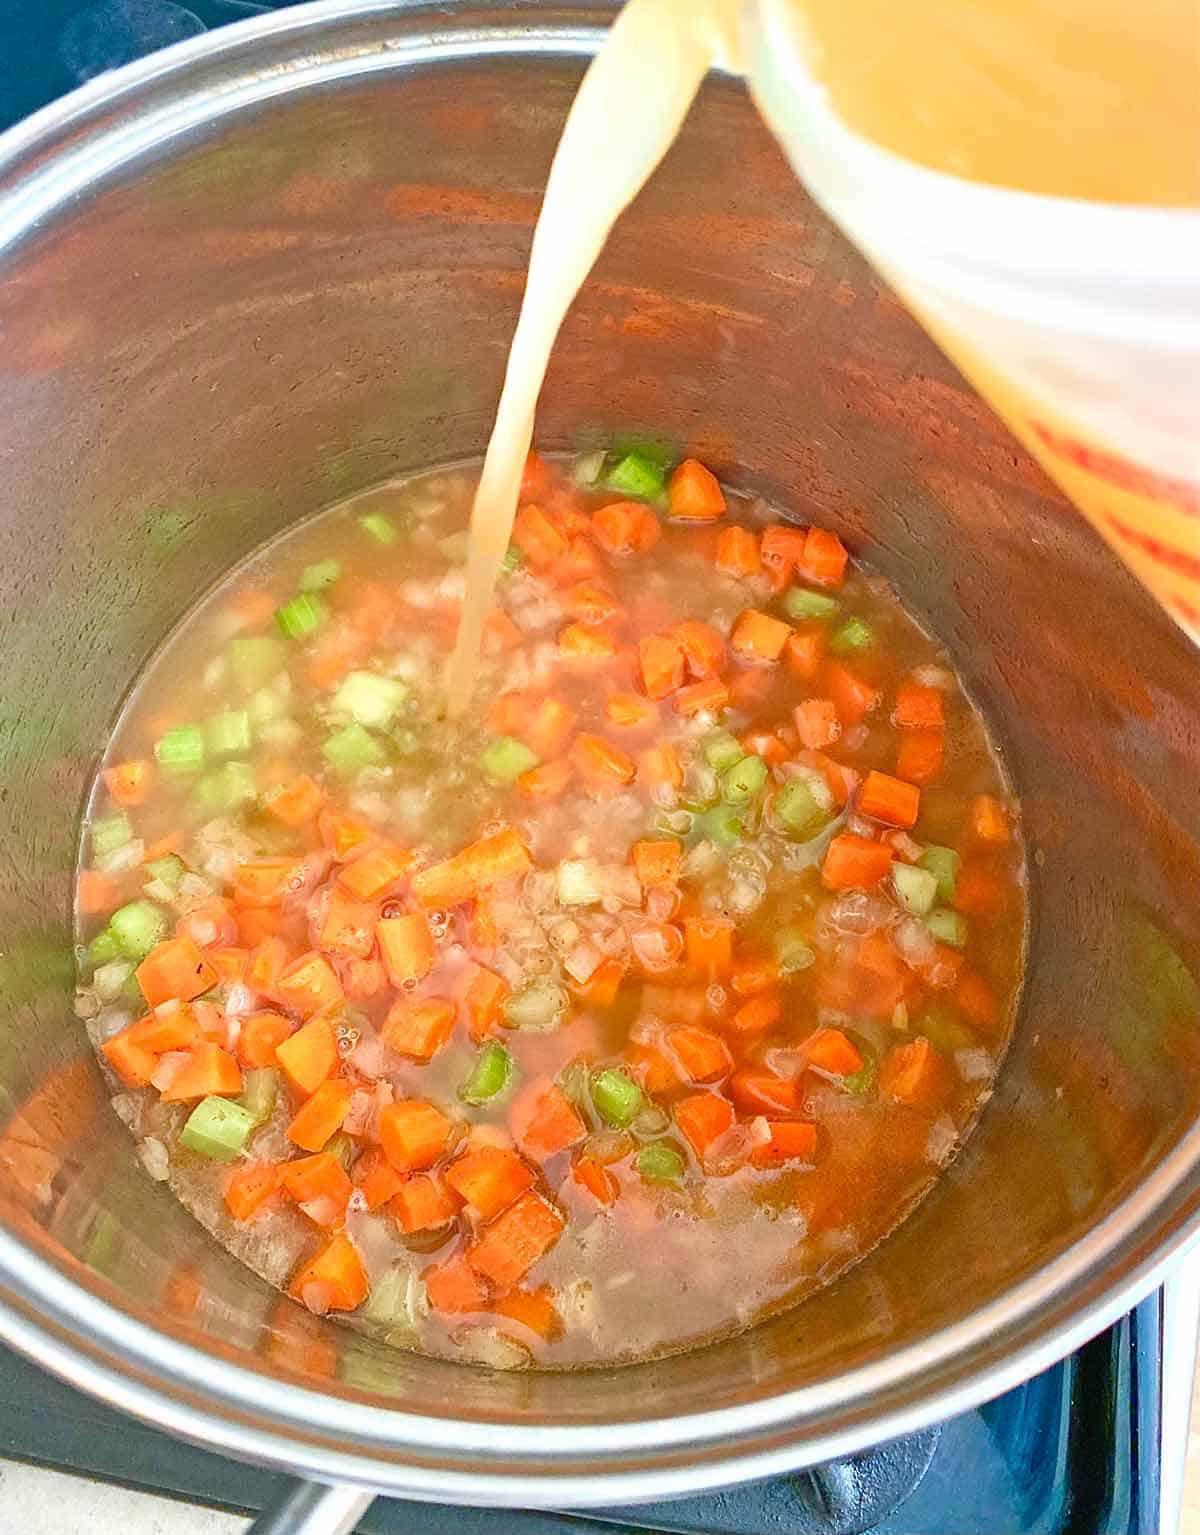 Pouring homemade chicken stock into the soup pot.